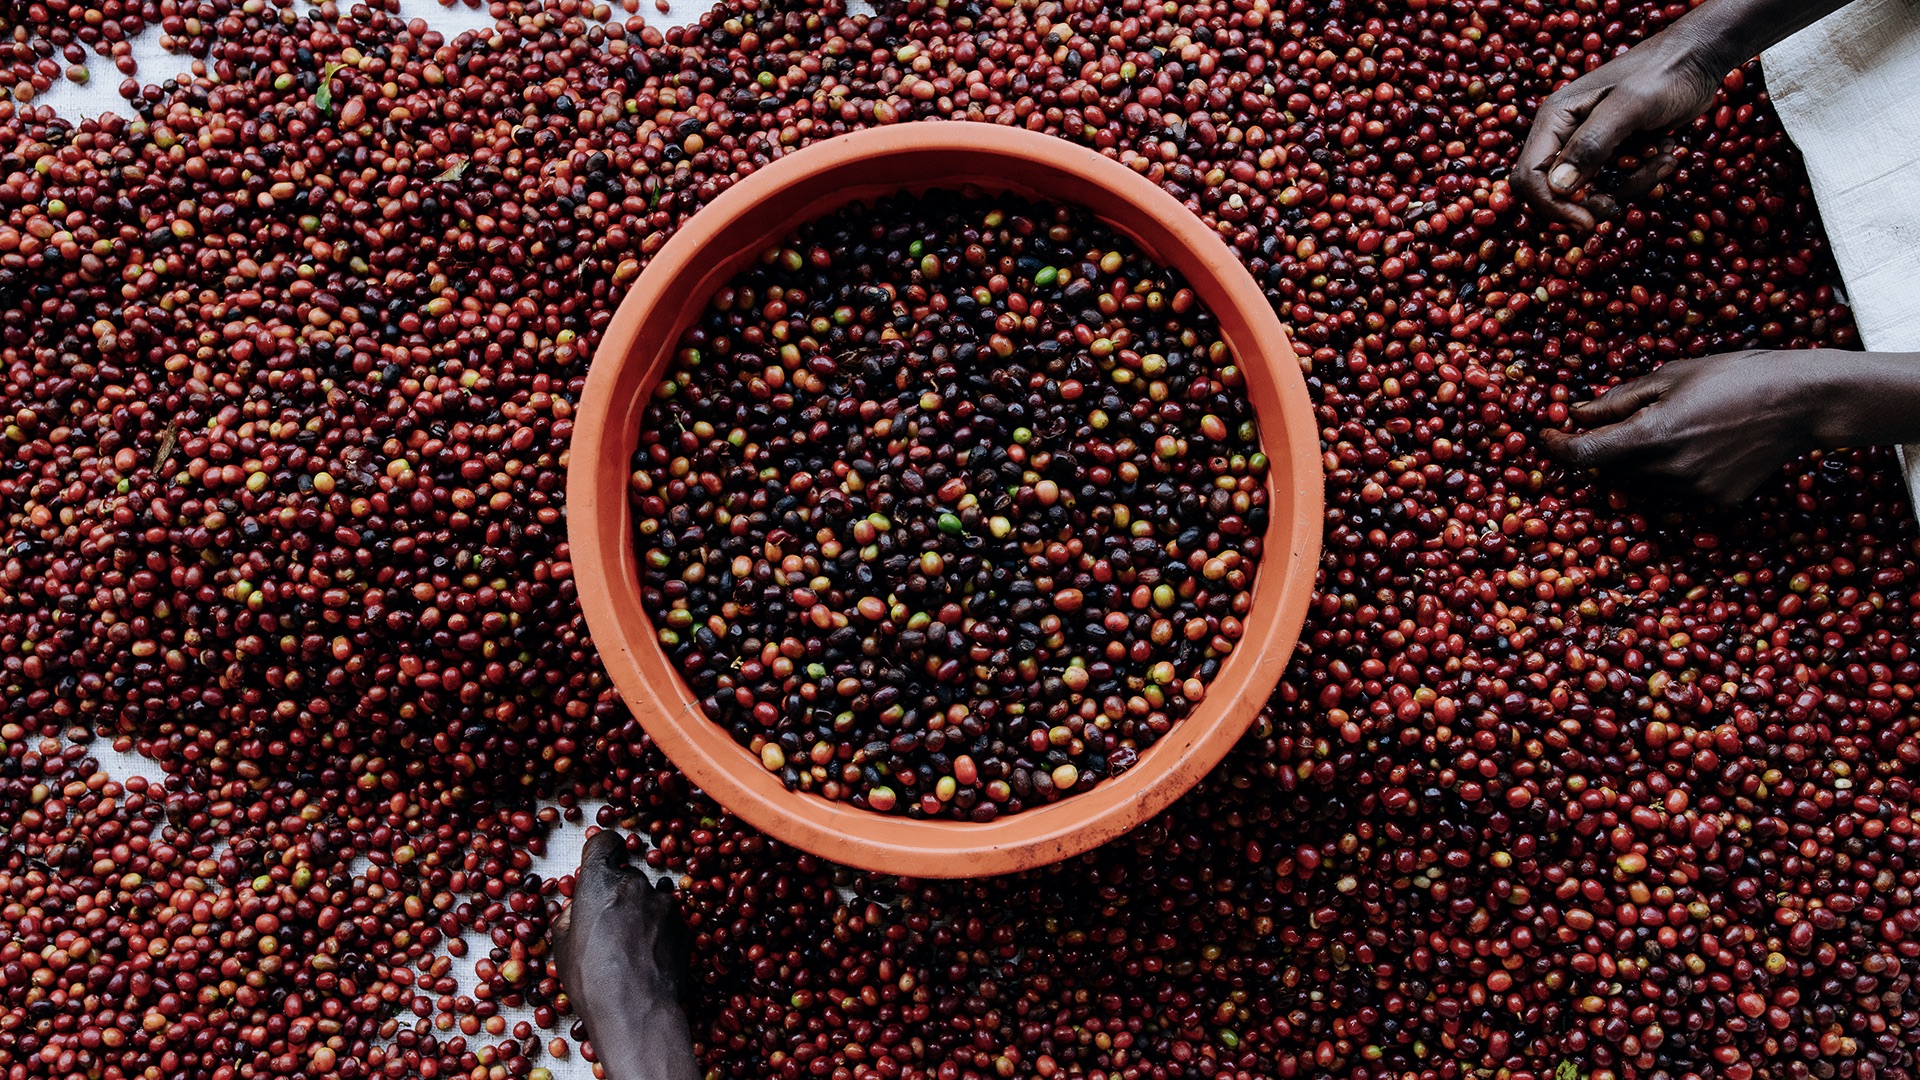 Licensing Contributor Aidan Campbell on documenting the coffee production process in Rwanda